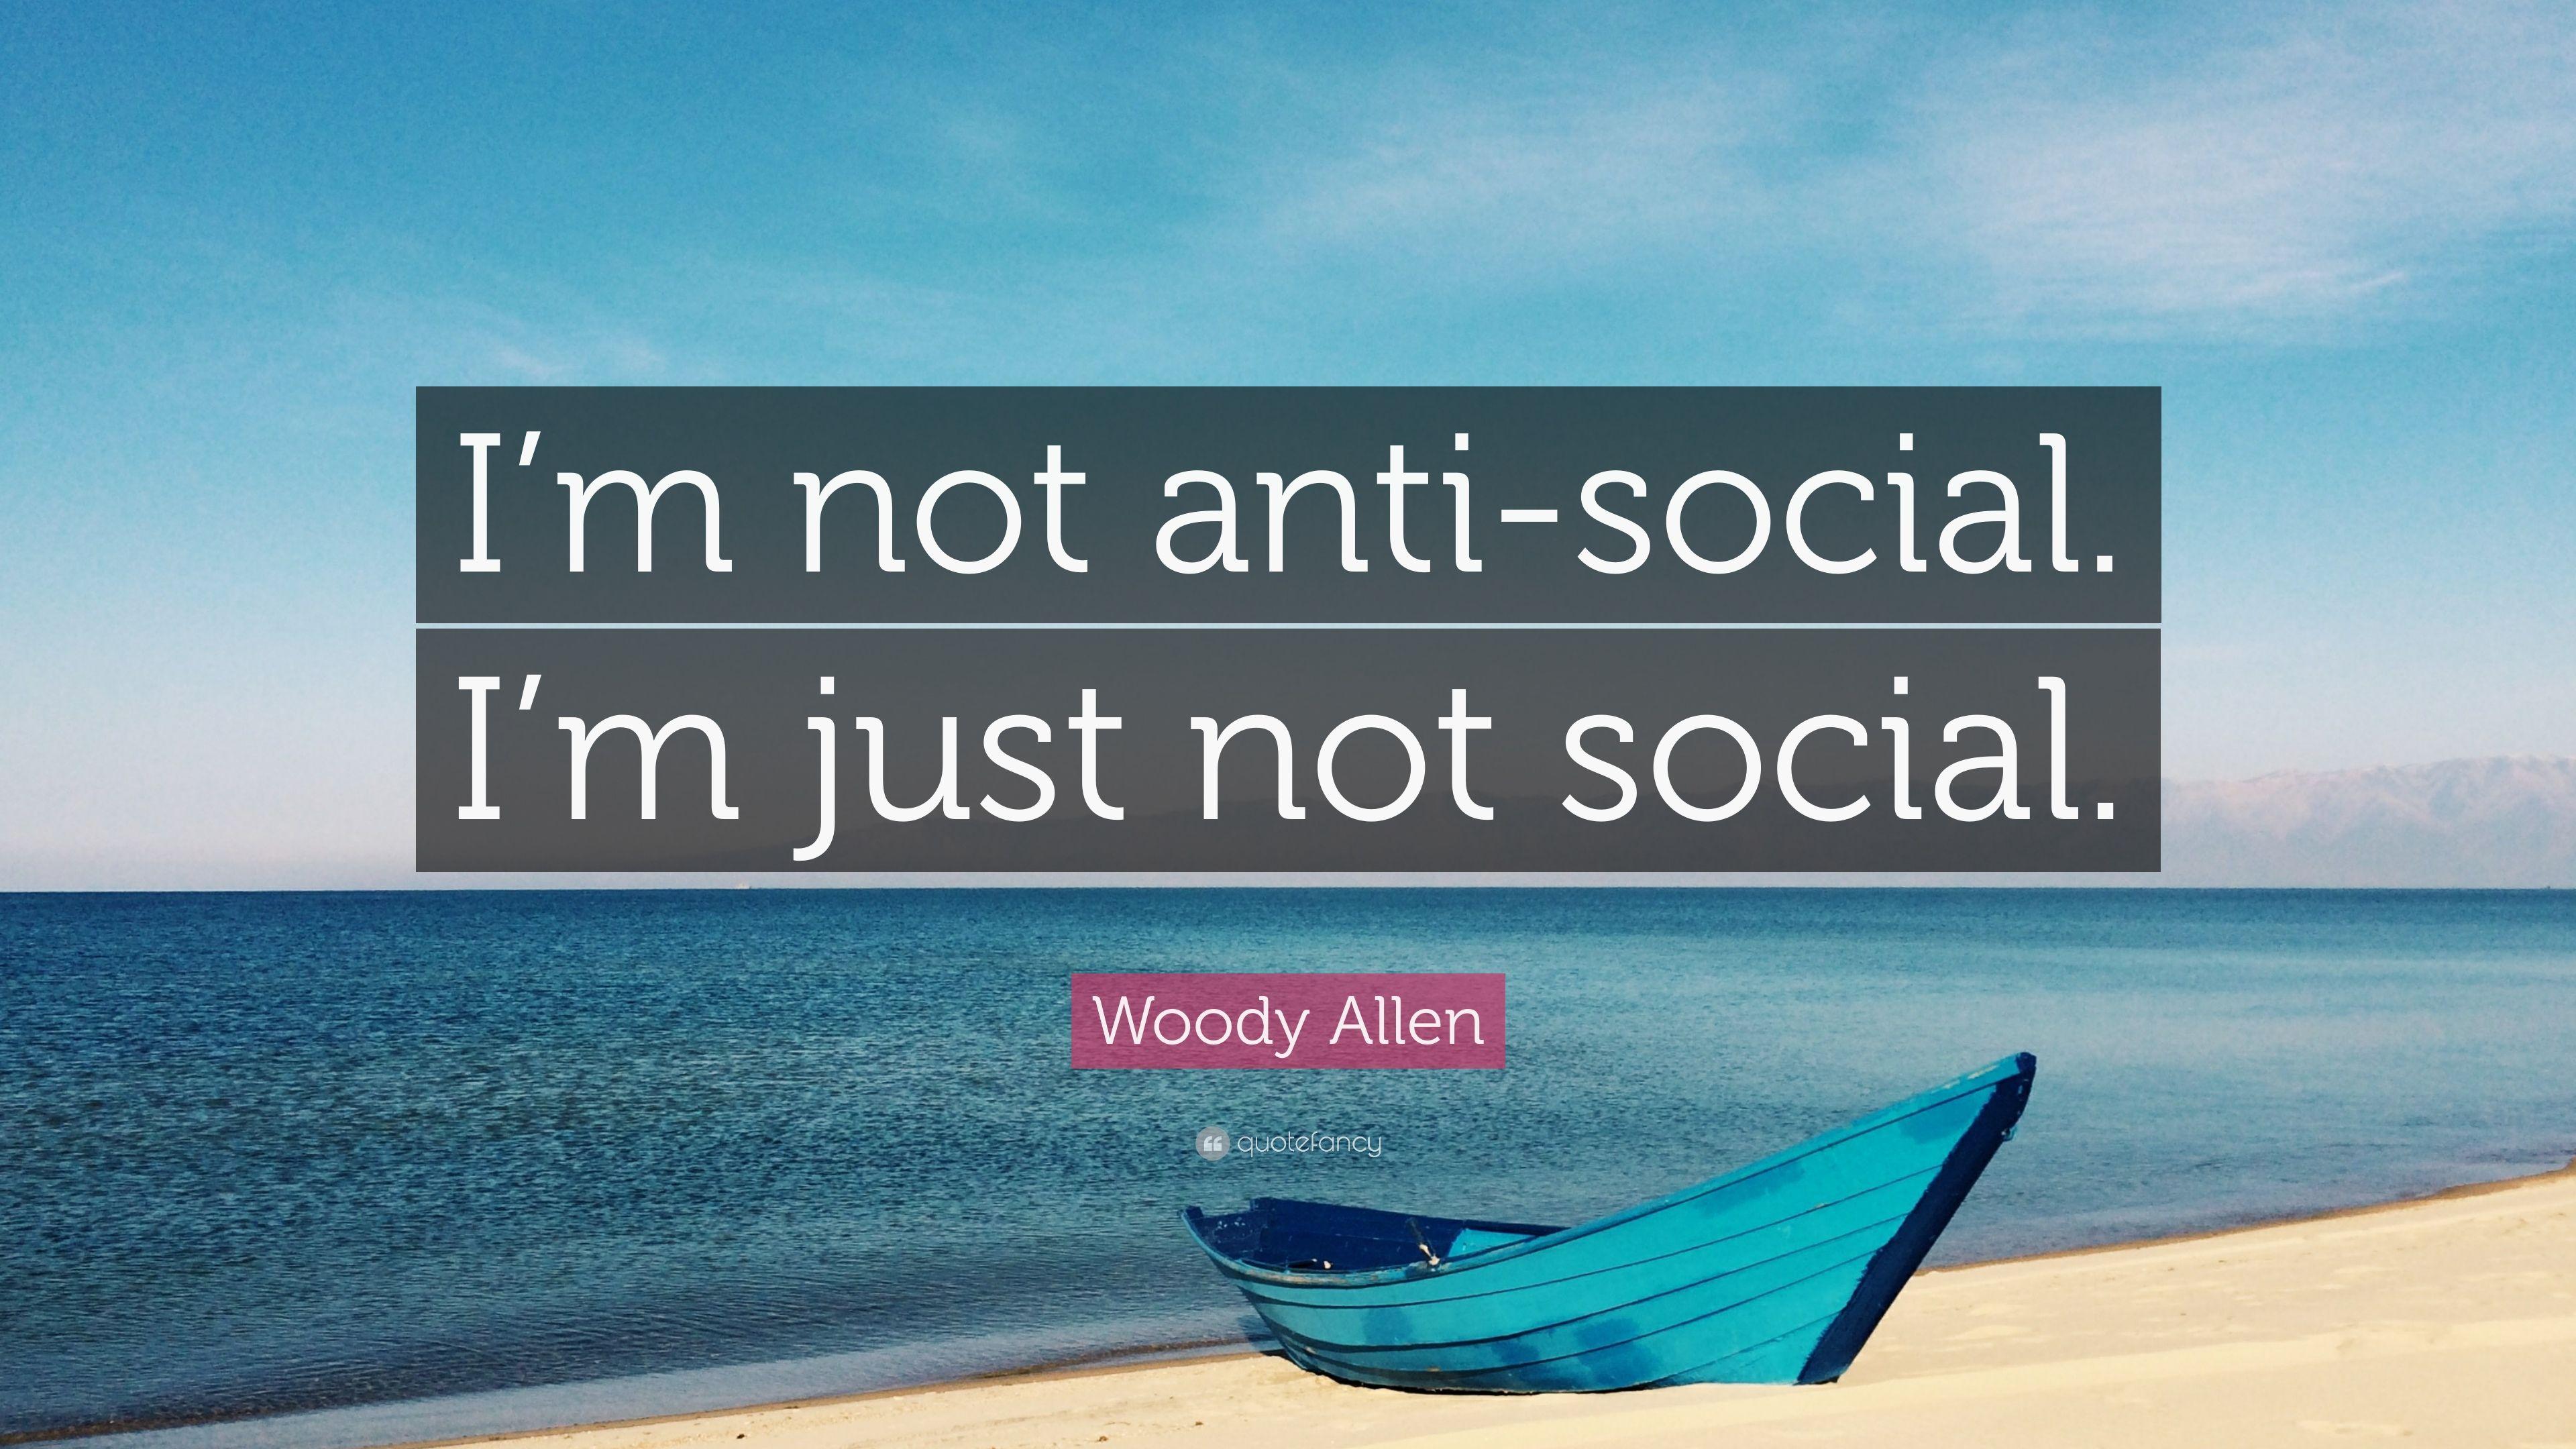 Woody Allen Quote: “I'm Not Anti Social. I'm Just Not Social.” 12